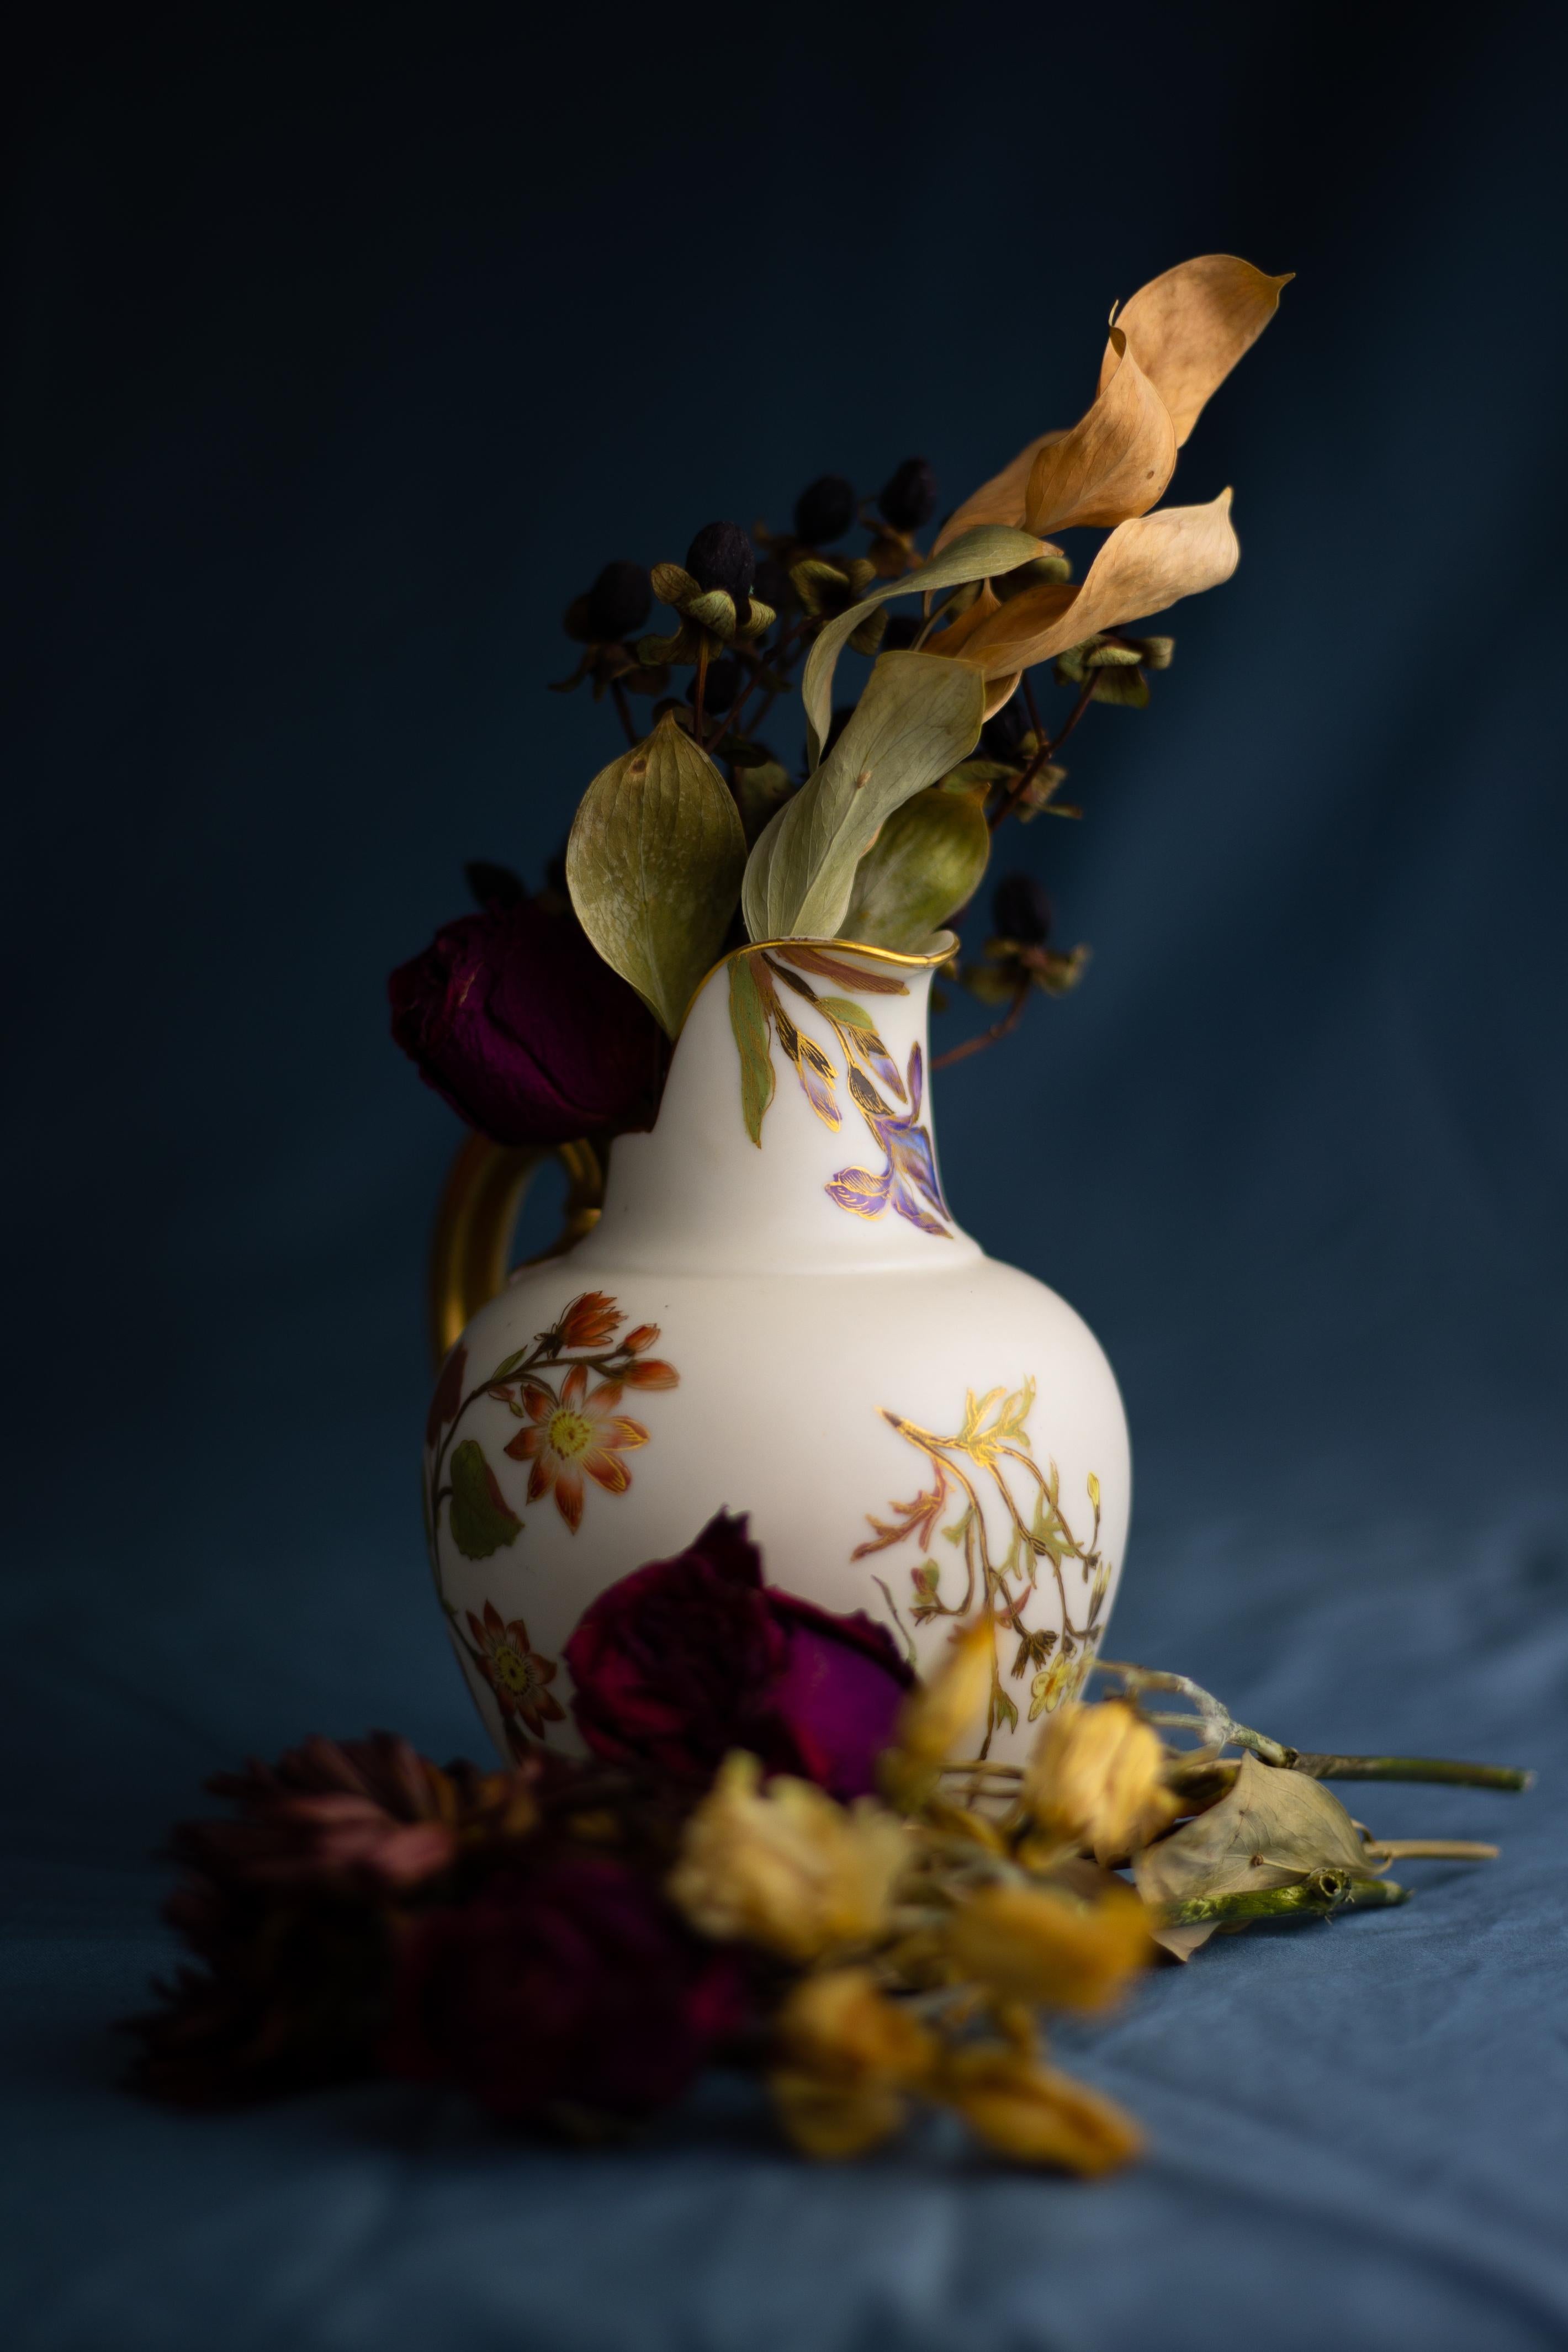 A beautiful blush porcelain pitcher in the Aesthetic style, made by Royal Worcester in 1890.

This small pitcher is decorated with hand-painted flowers in a naturalistic japonisme style, a style which was emblematic of the Aesthetic Movement. The